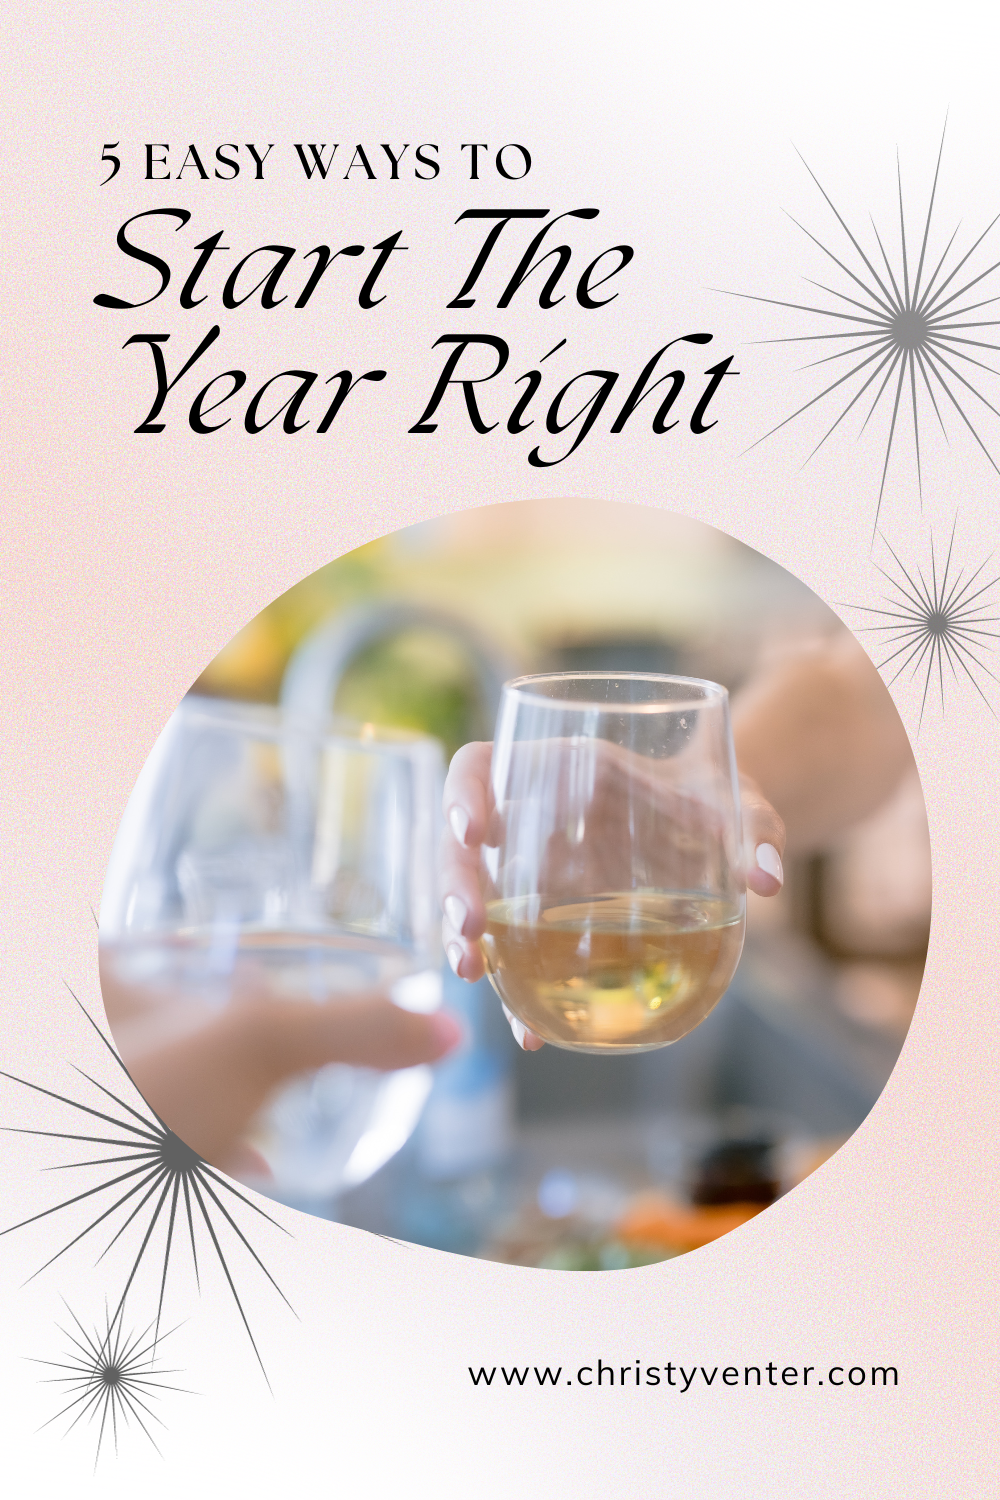 5 Easy Ways to Start The New Year Right